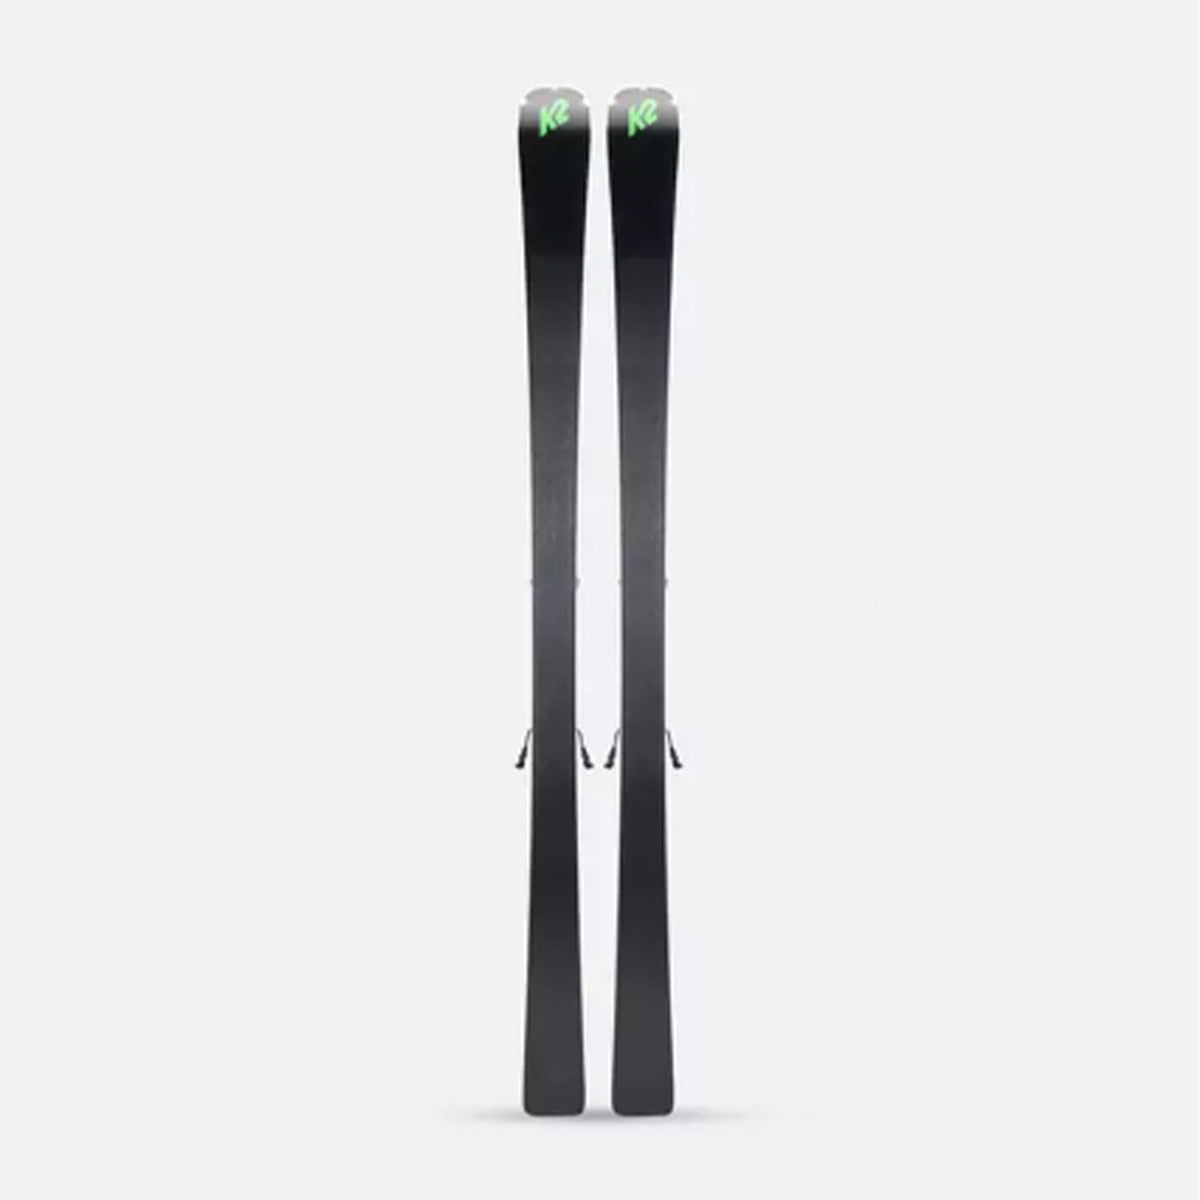 Image features the bottom of the K2 Men's Disruption 78c skis in black with lime green K2 logos on the tips.